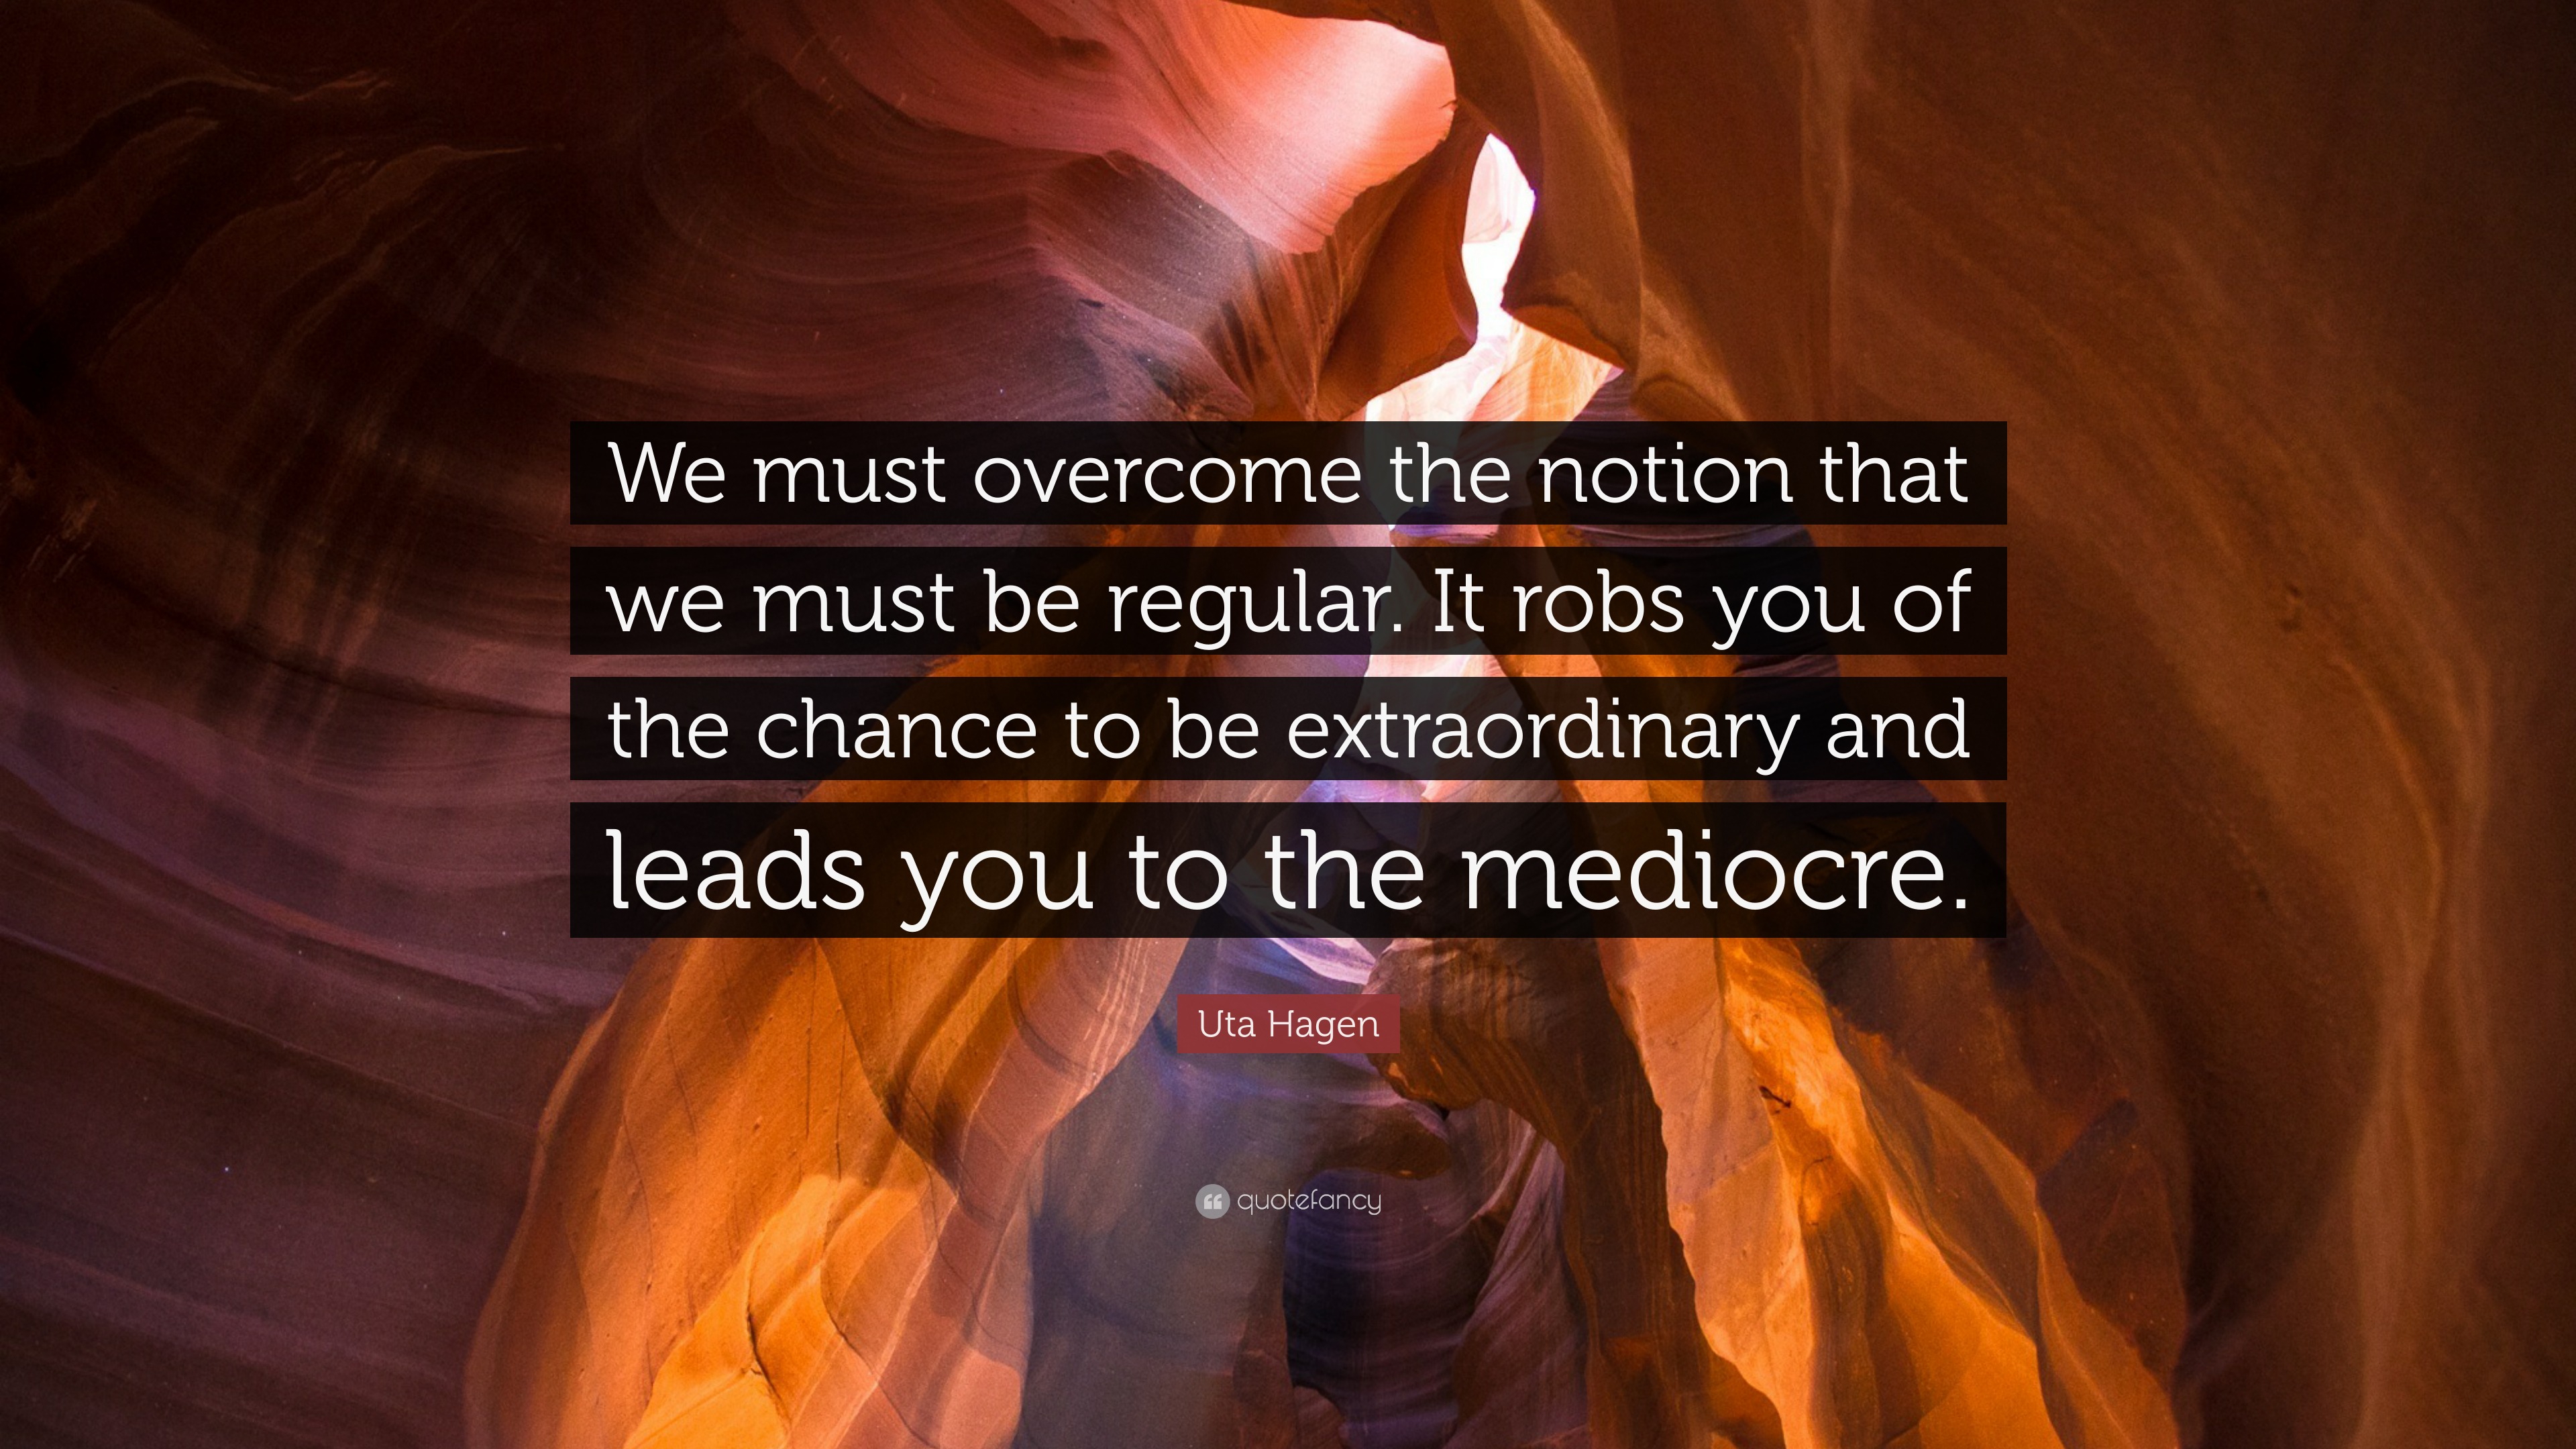 Uta Hagen Quote: "We must overcome the notion that we must be regular. It robs you of the chance ...